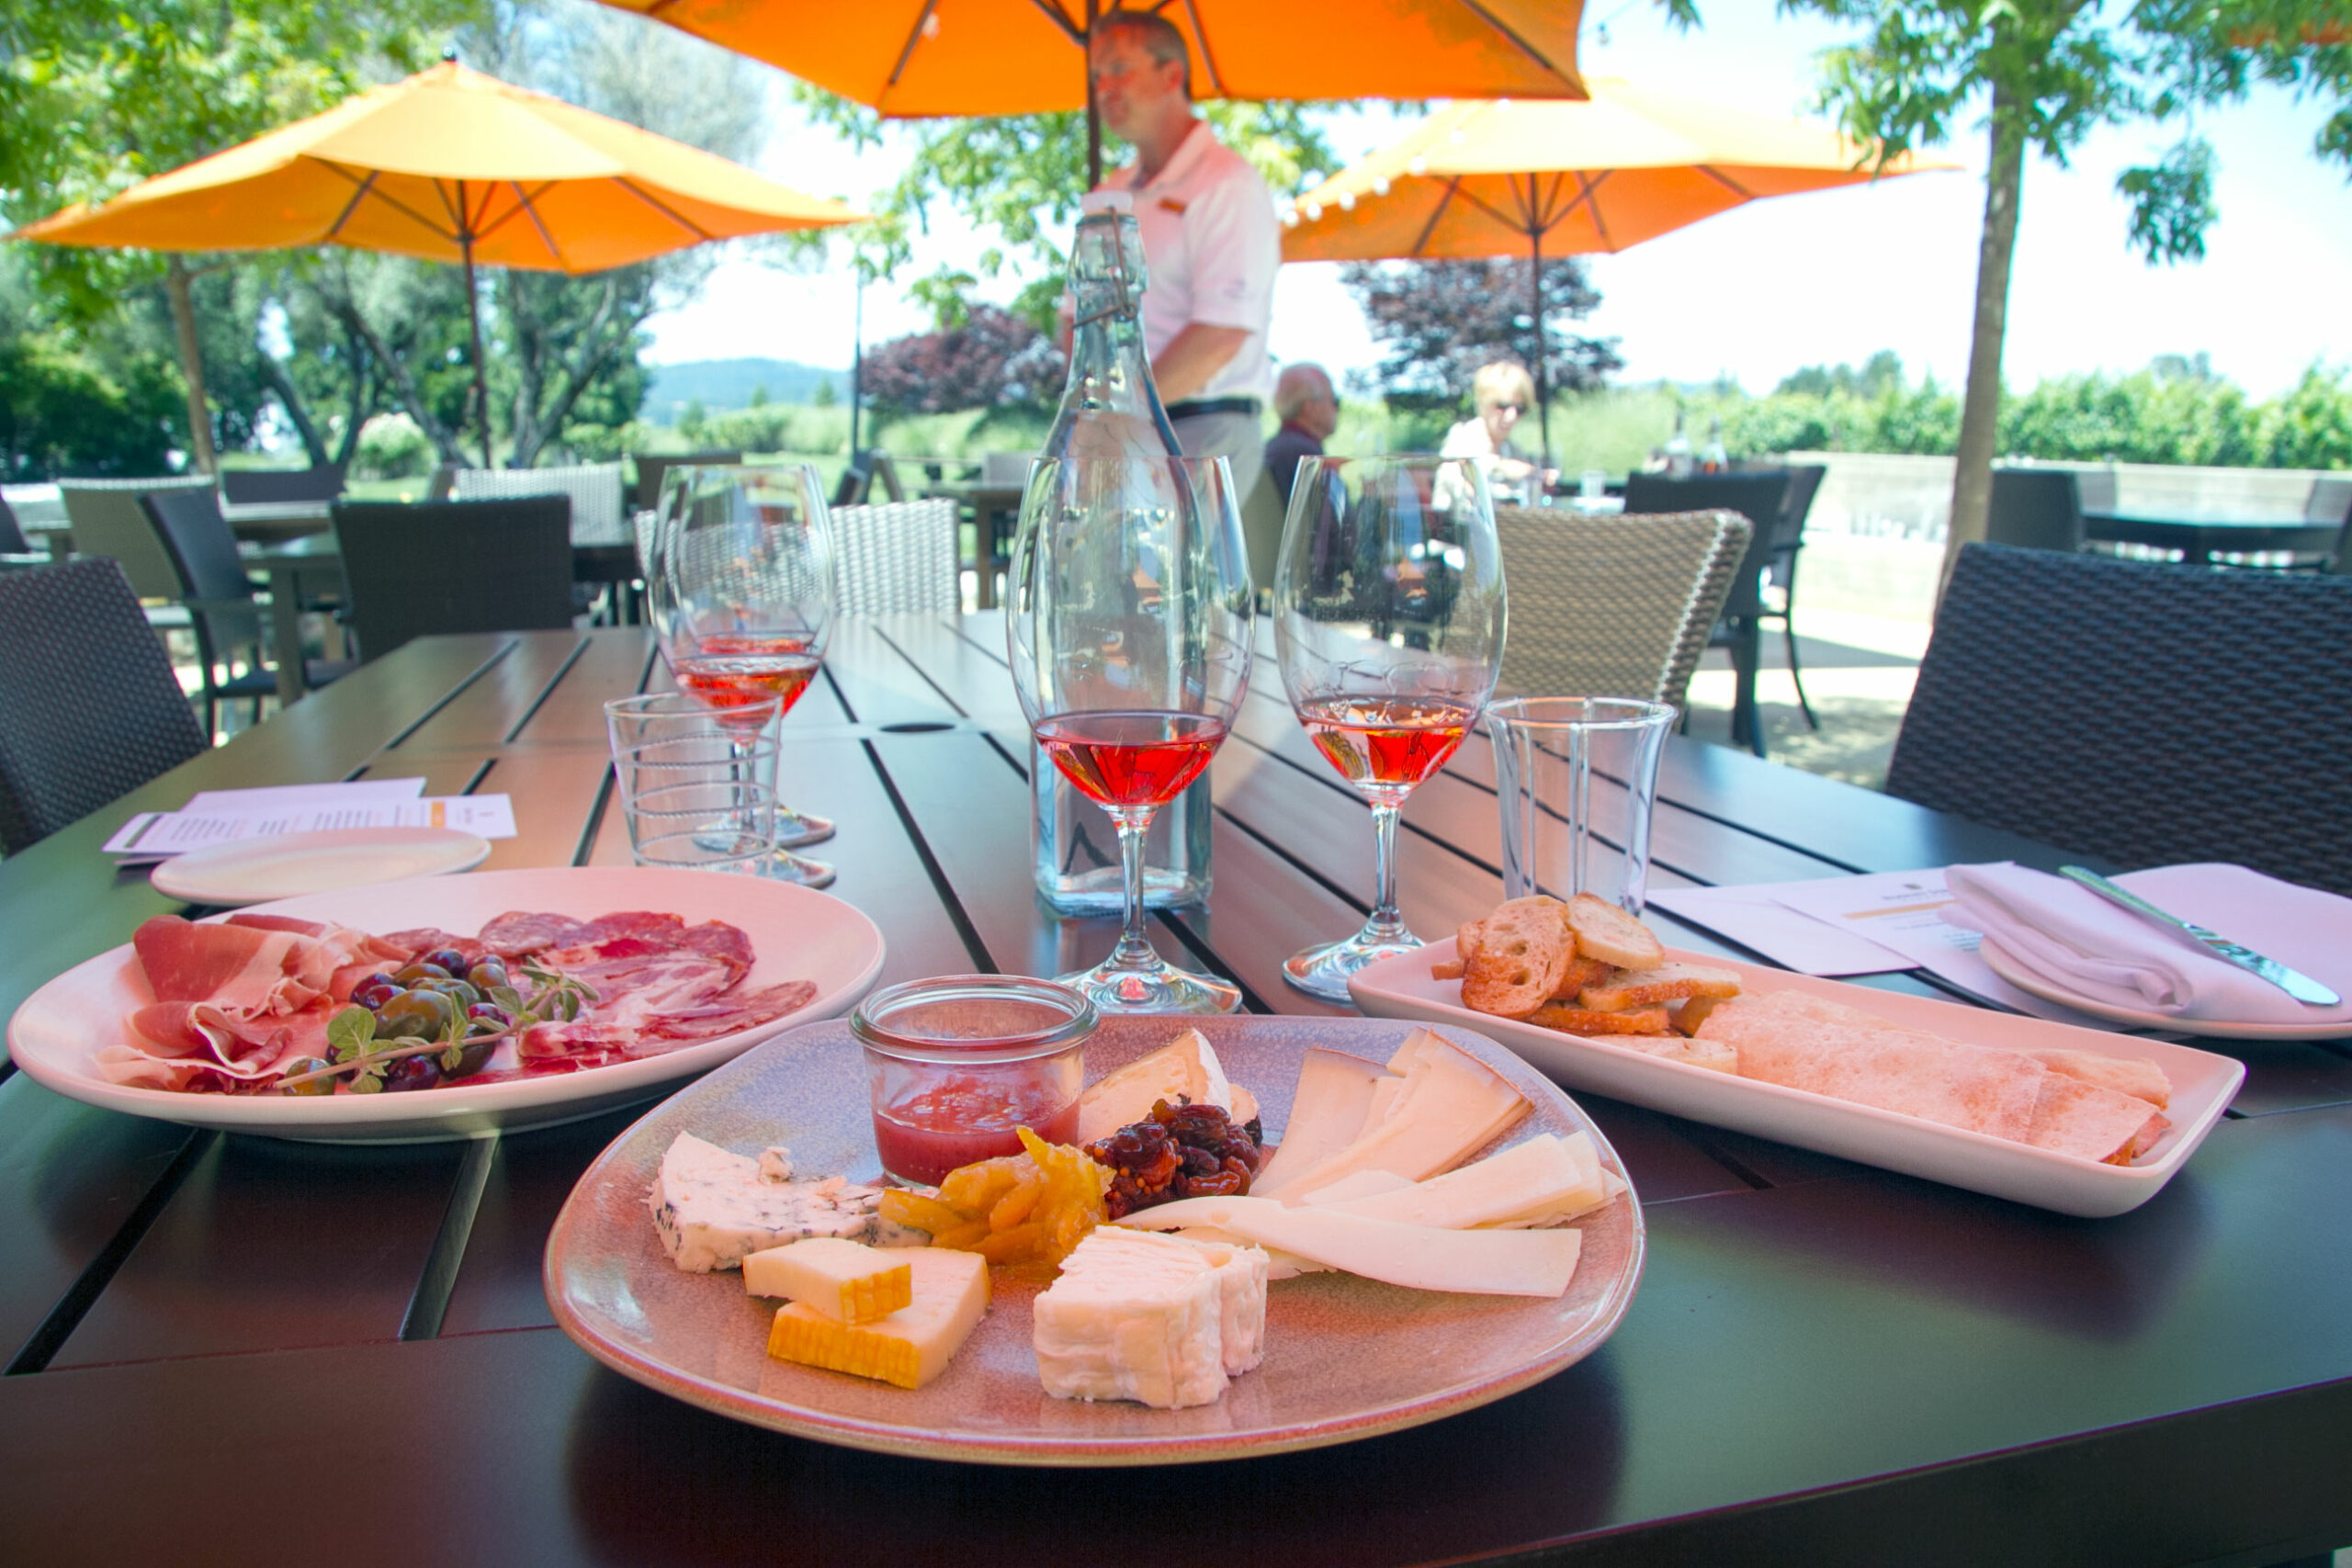 The Terrace at Rodney Strong Vineyards has opened with a luxe pairing menu. Photo: Heather Irwin.